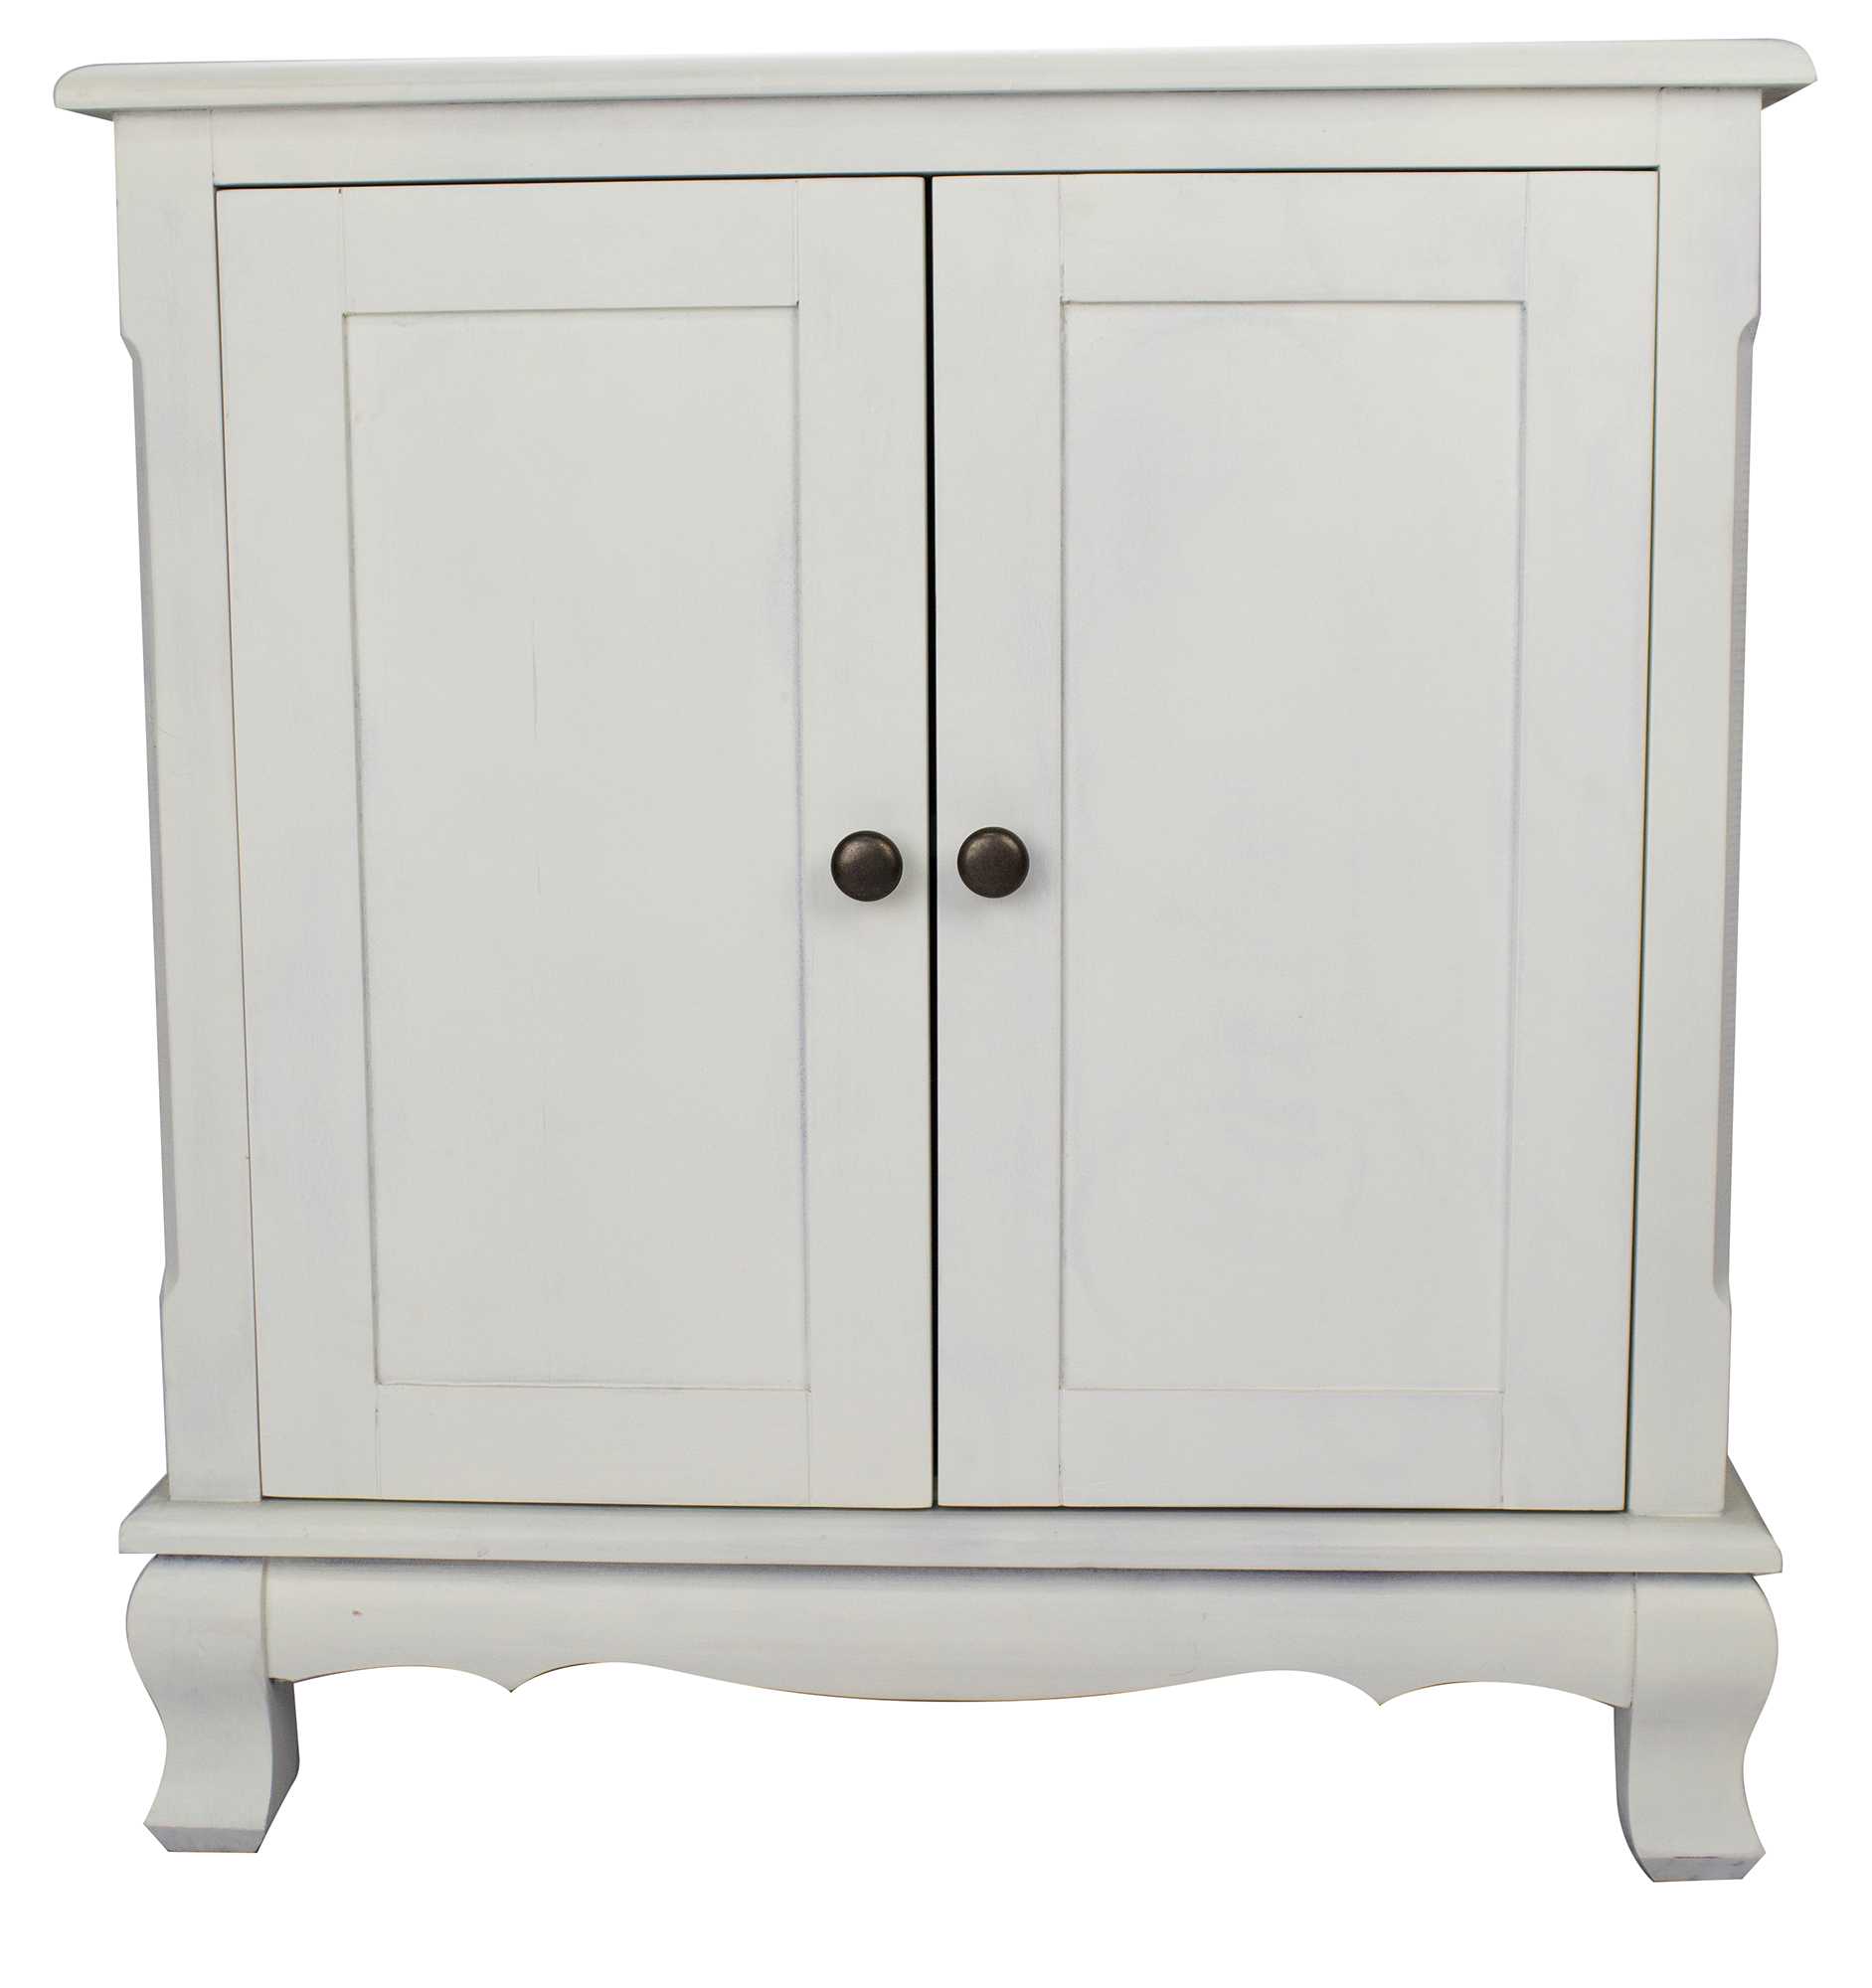 27.6" X 15" X 30" White Wood Pine Sideboard with Doors and a Shelf